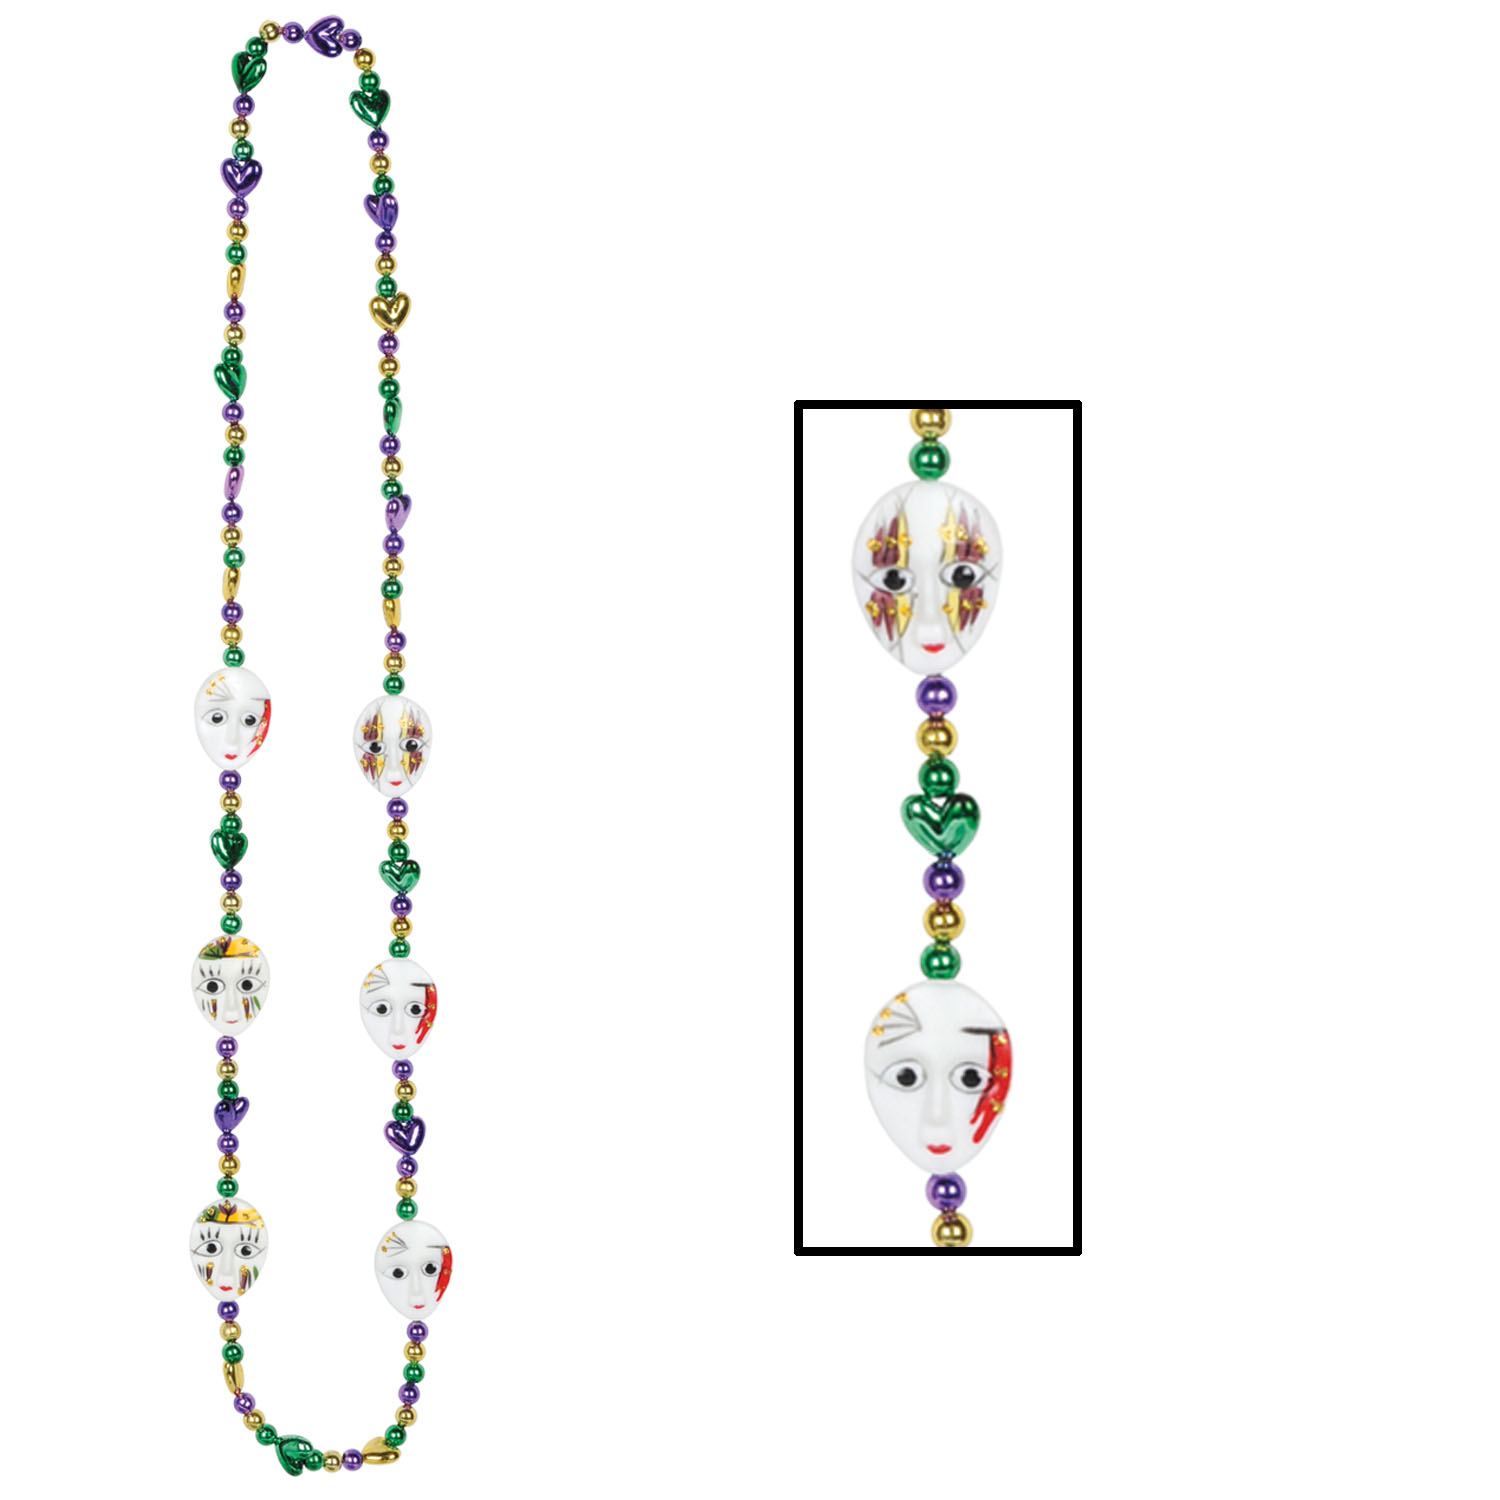 mardi gras beads with little mime faces going around the necklace.  